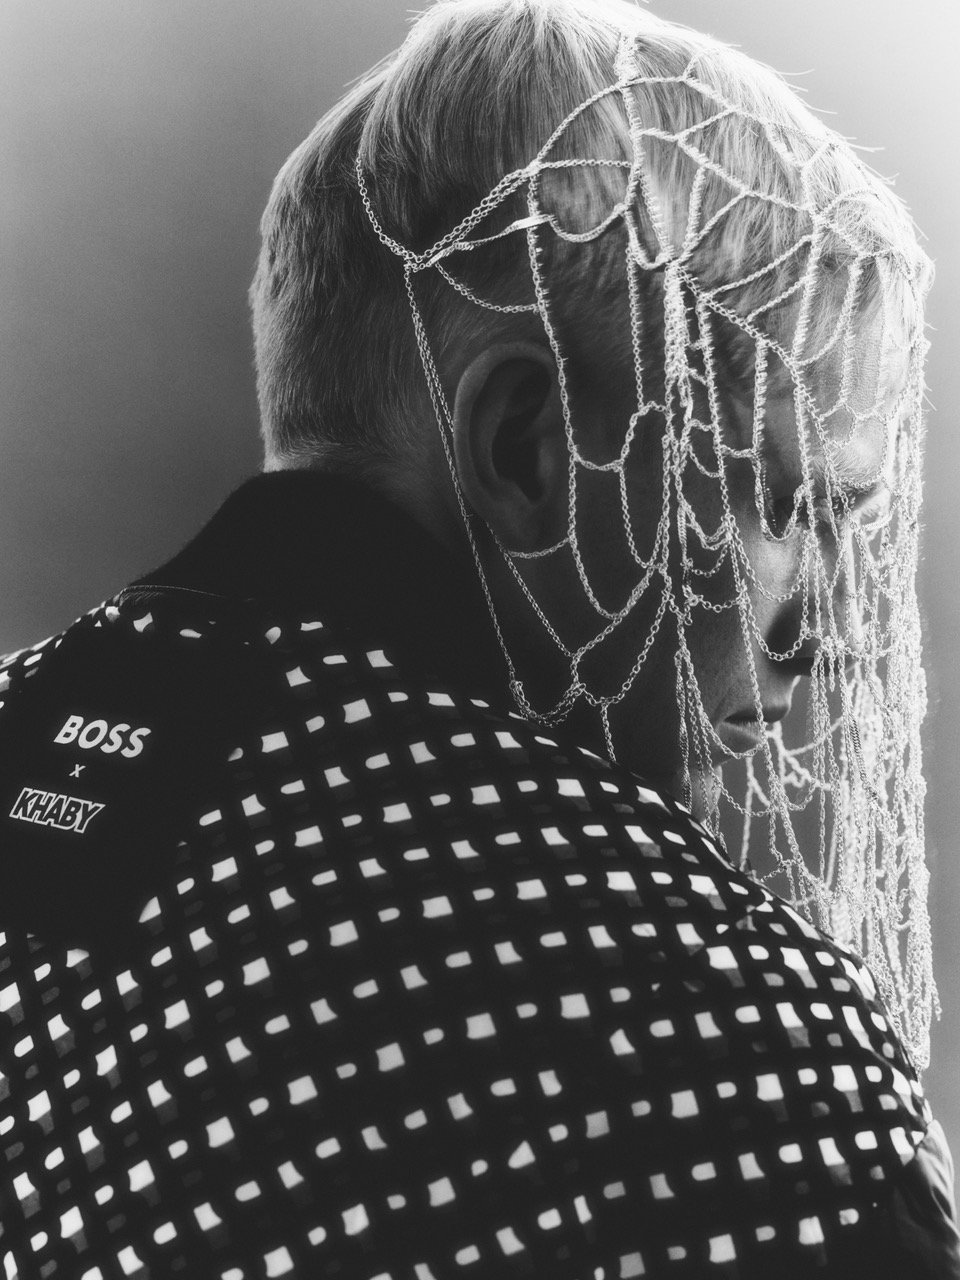  PERFECT, September 2022  George Jaques wears Silver Cobweb Chain Top  Photography Petros  Styling Andrew Davis  Makeup Machiko Yano   